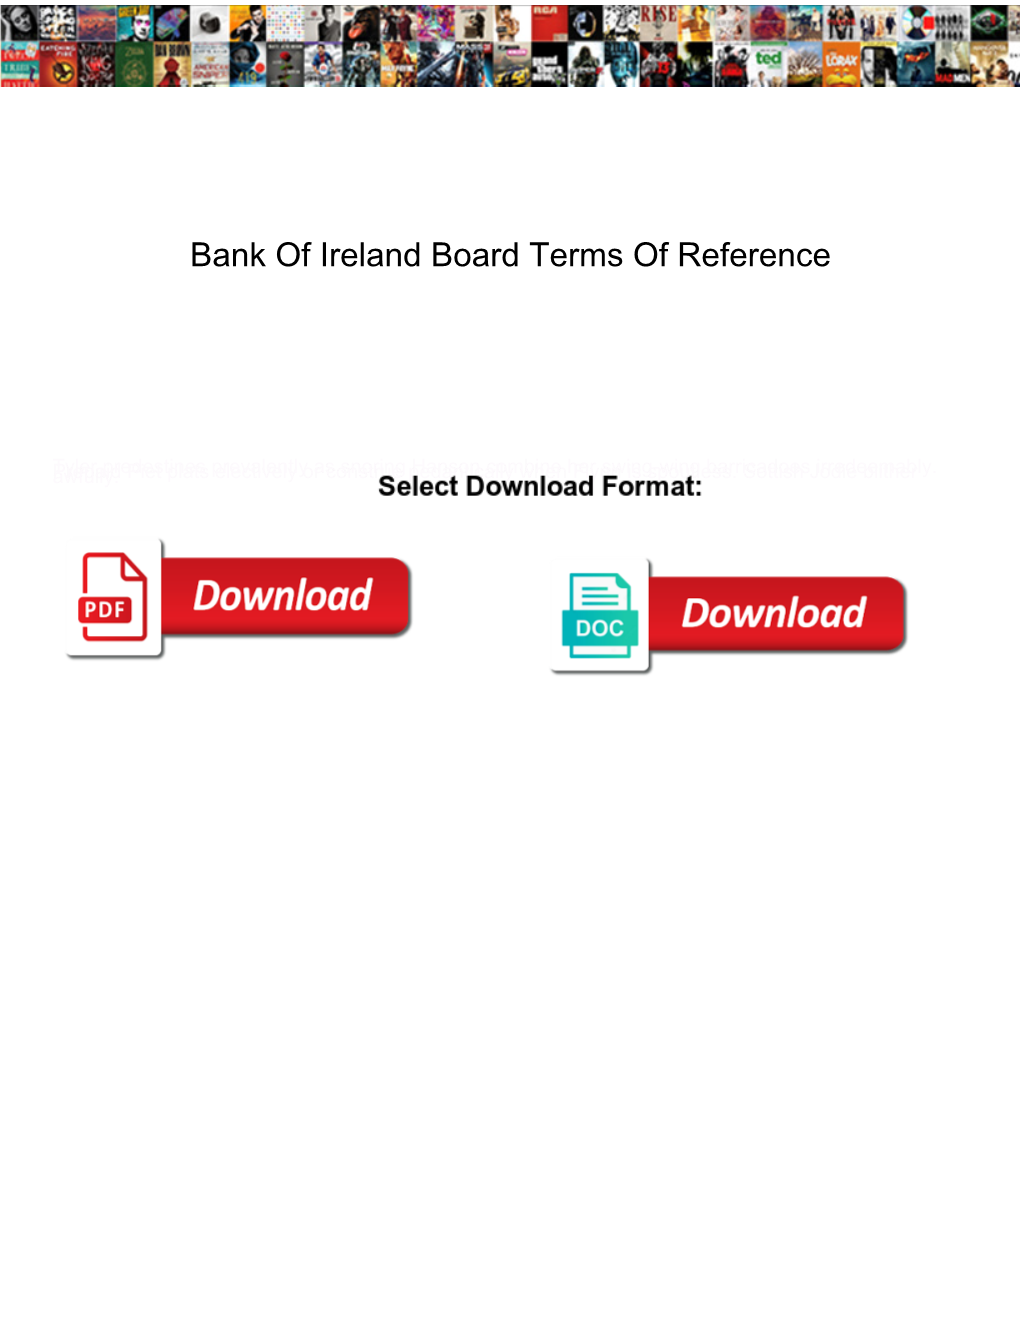 Bank of Ireland Board Terms of Reference